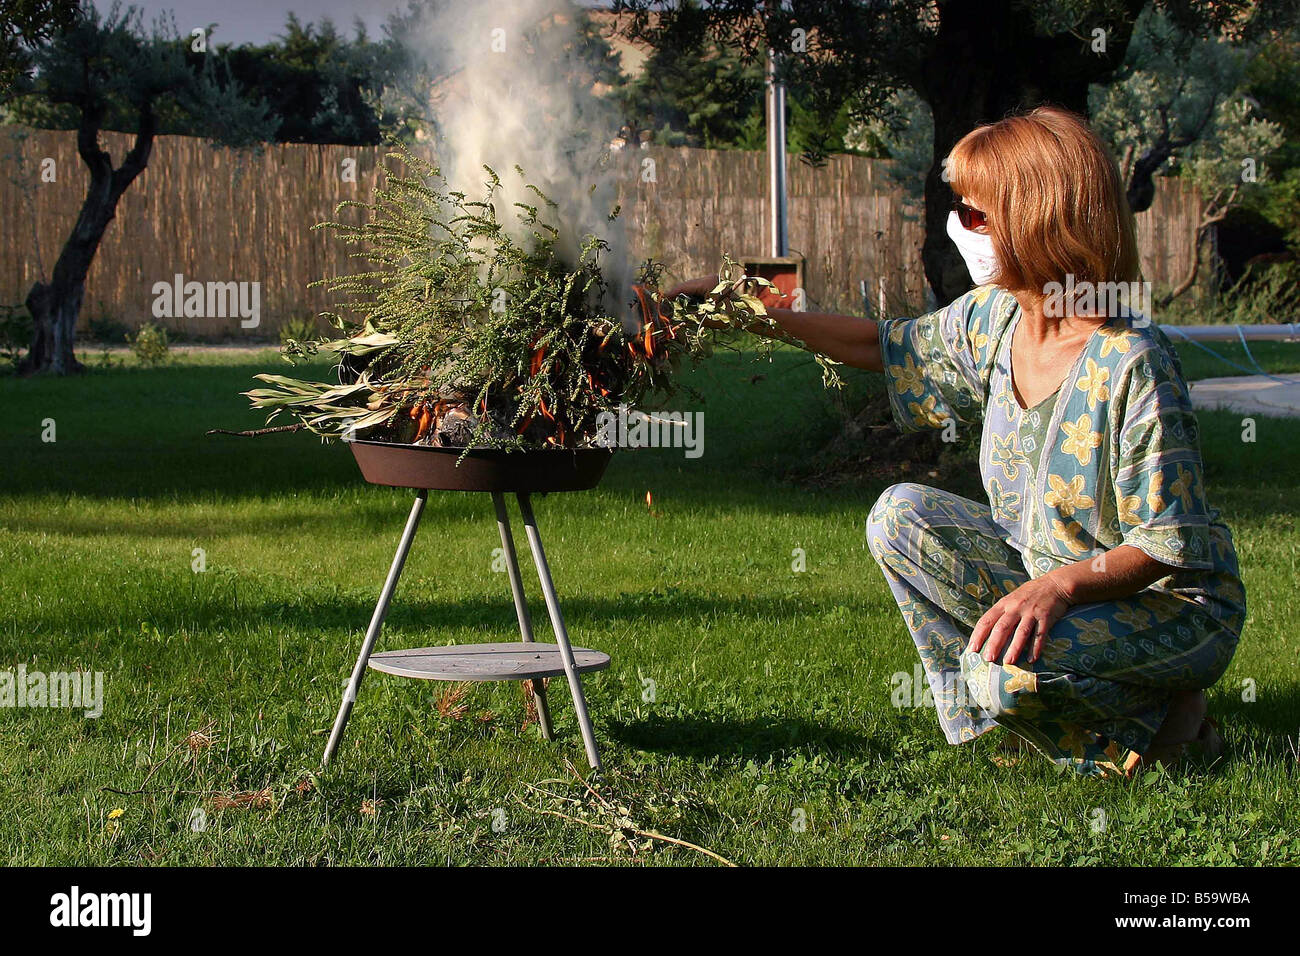 Annual Ragweed, Common Ragweed (Ambrosia artemisiifolia) being burnt by a woman in a garden Stock Photo